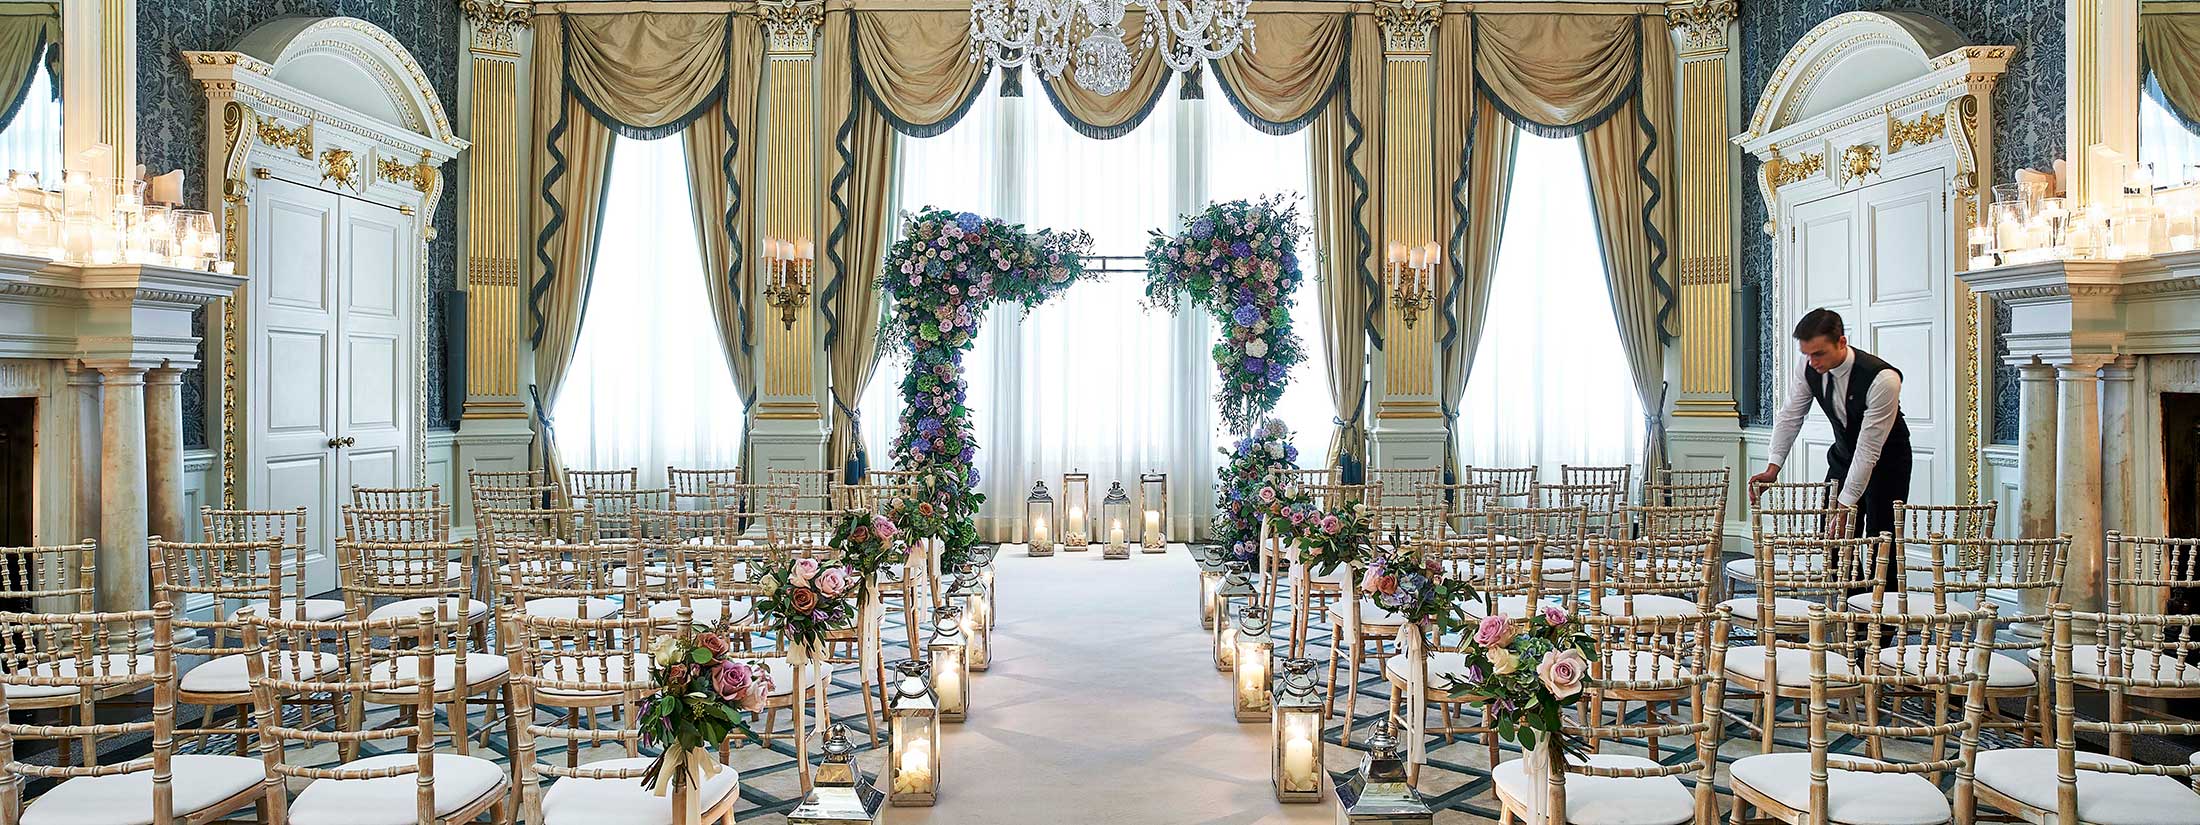 A view of the Drawing Room when it is transformed for wedding purposes, decorated with flowers and candles.